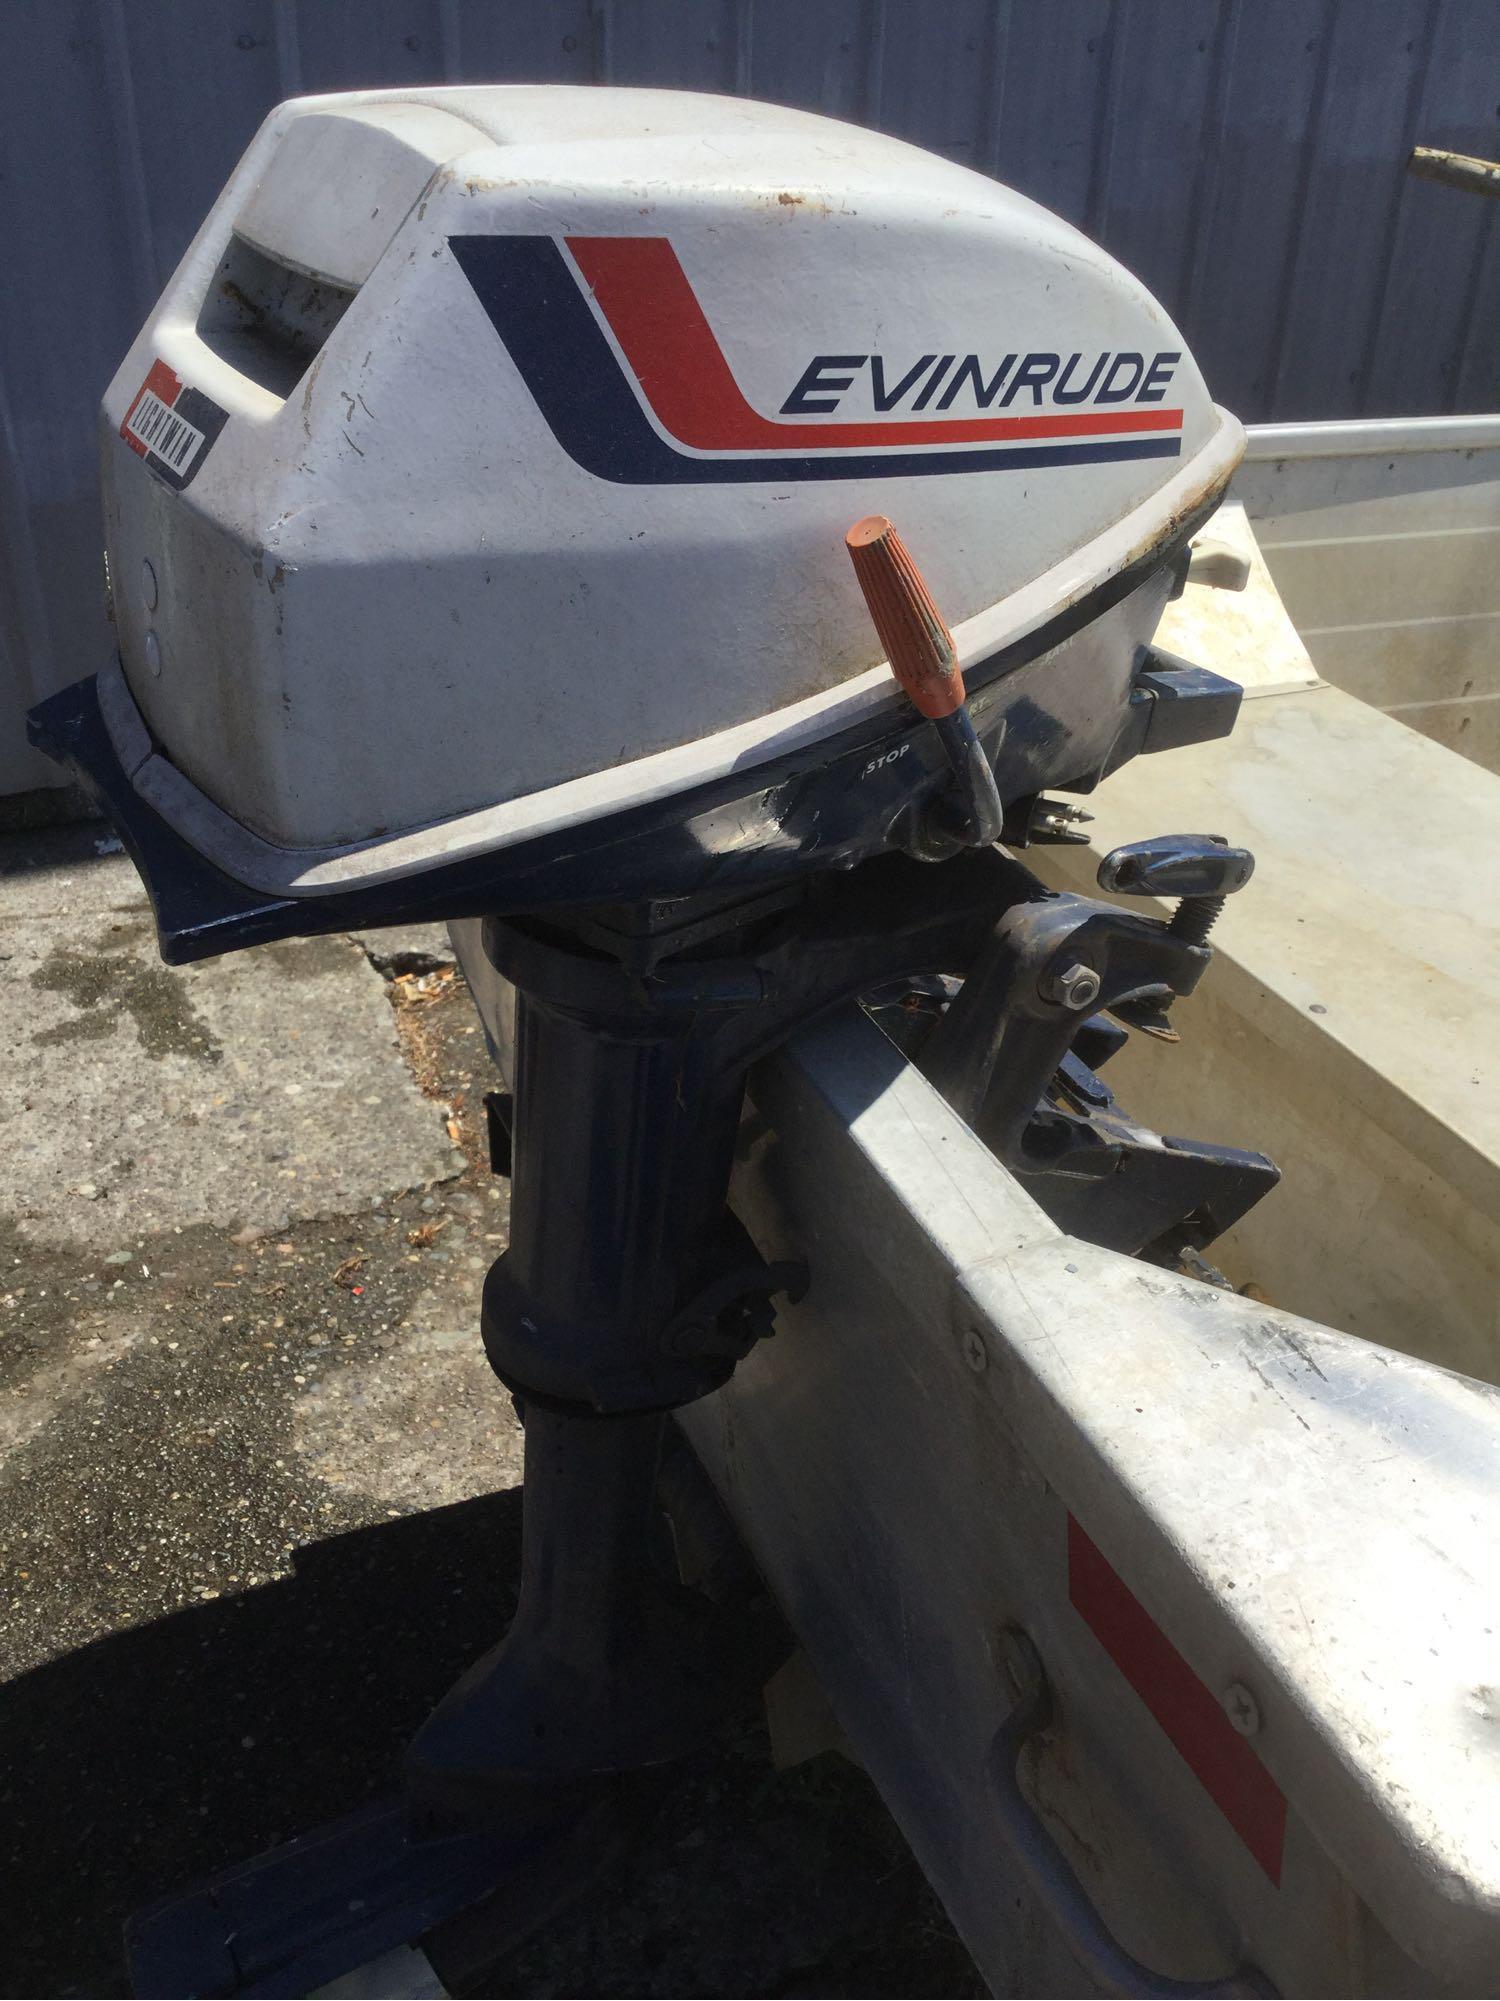 Sears steel boat model no. 61823 with Evinrude Lightwin outboard motor and trailer